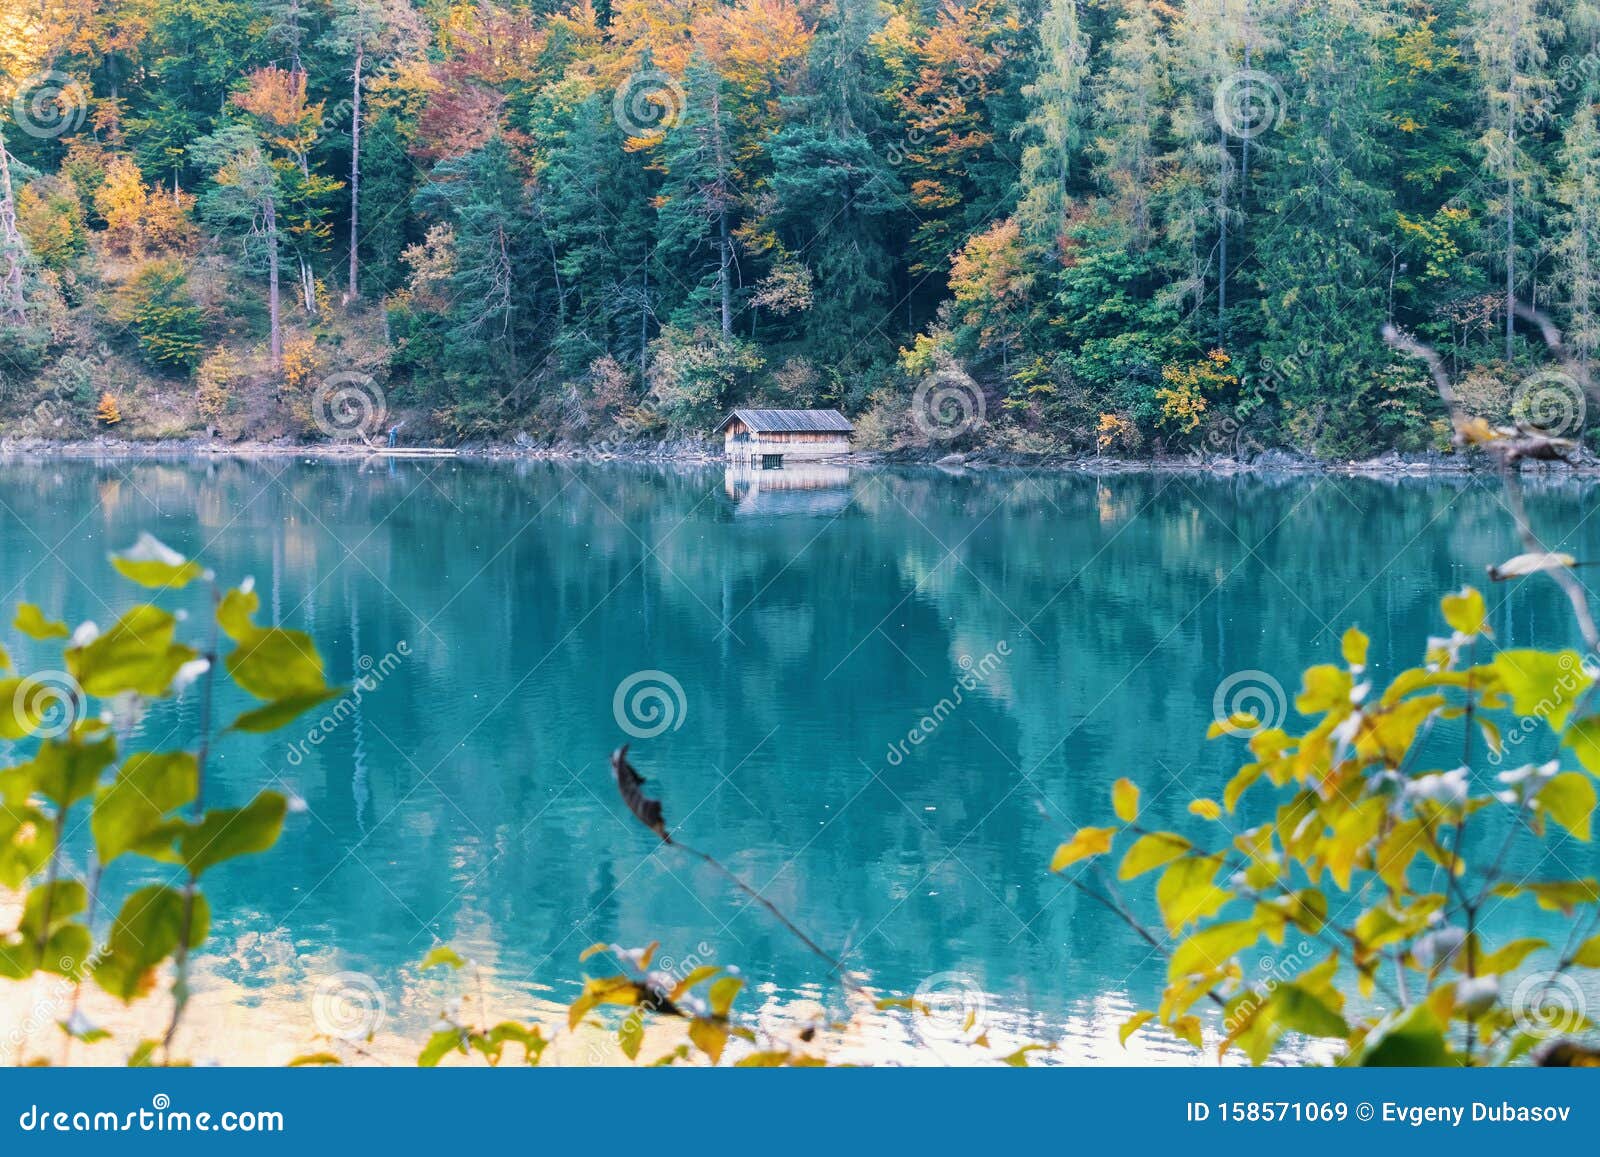 Cabin on the Lake in the in the Mountains Stock Image - of blue: 158571069